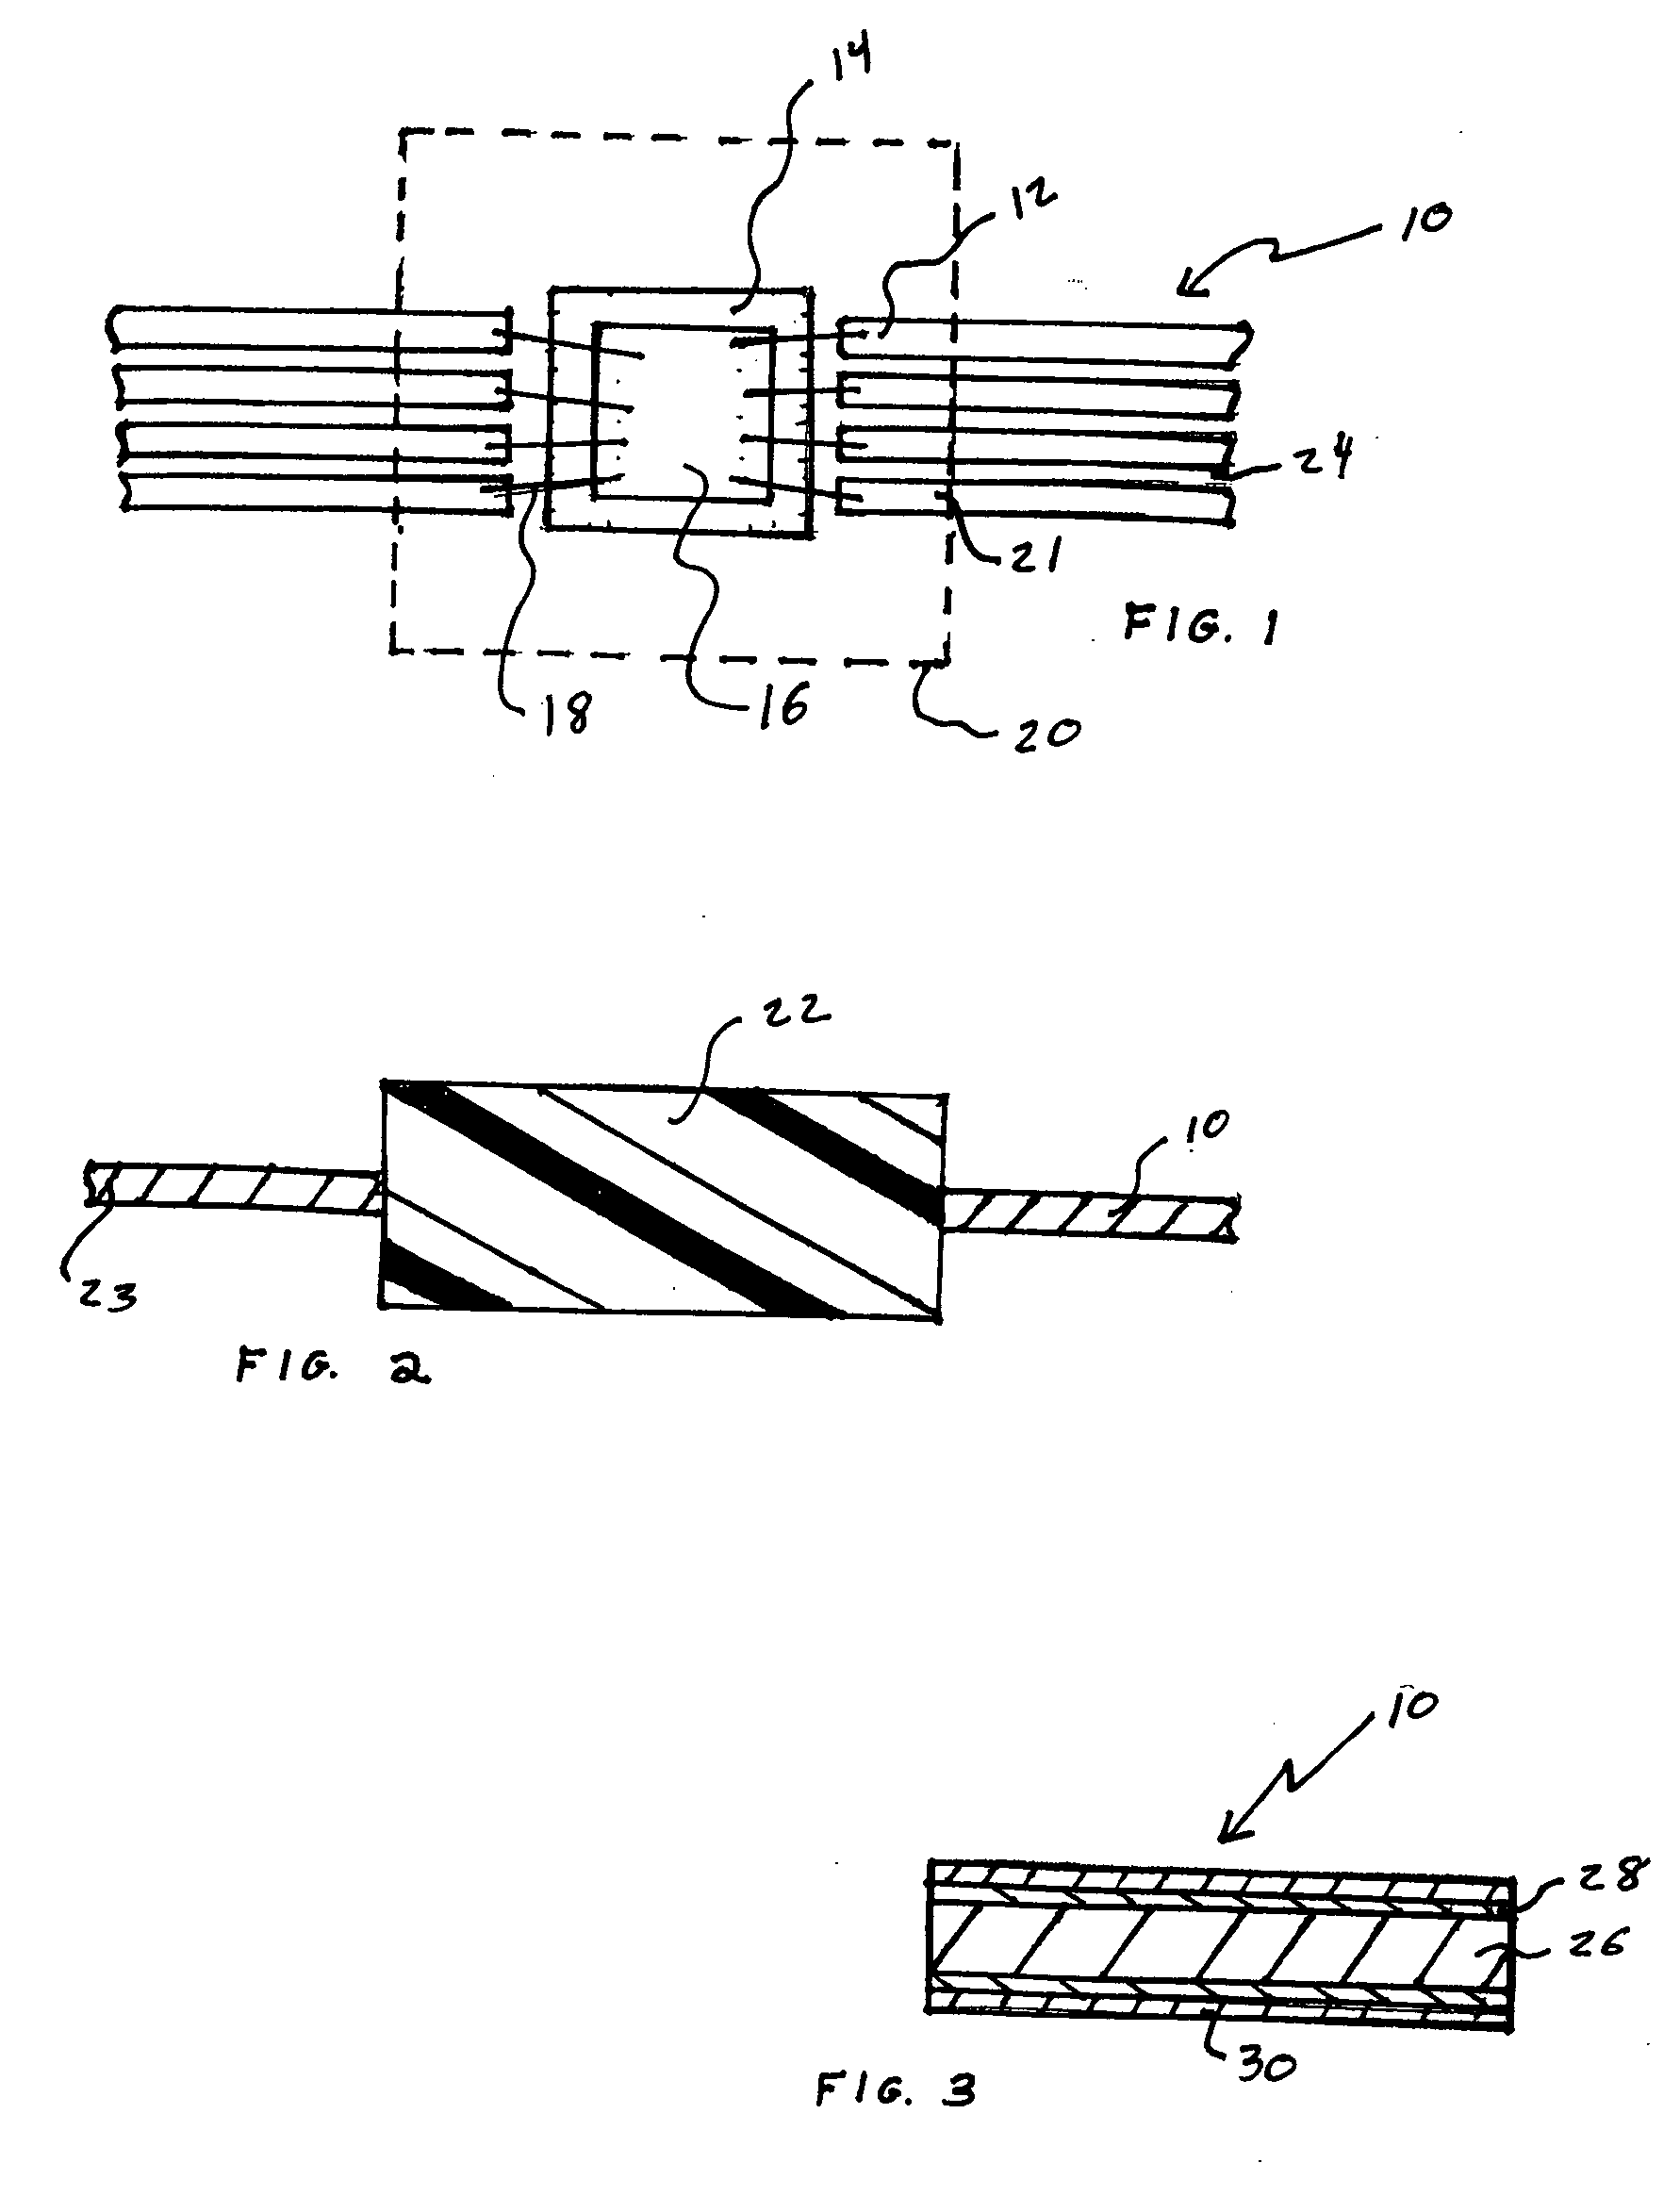 Fretting and whisker resistant coating system and method